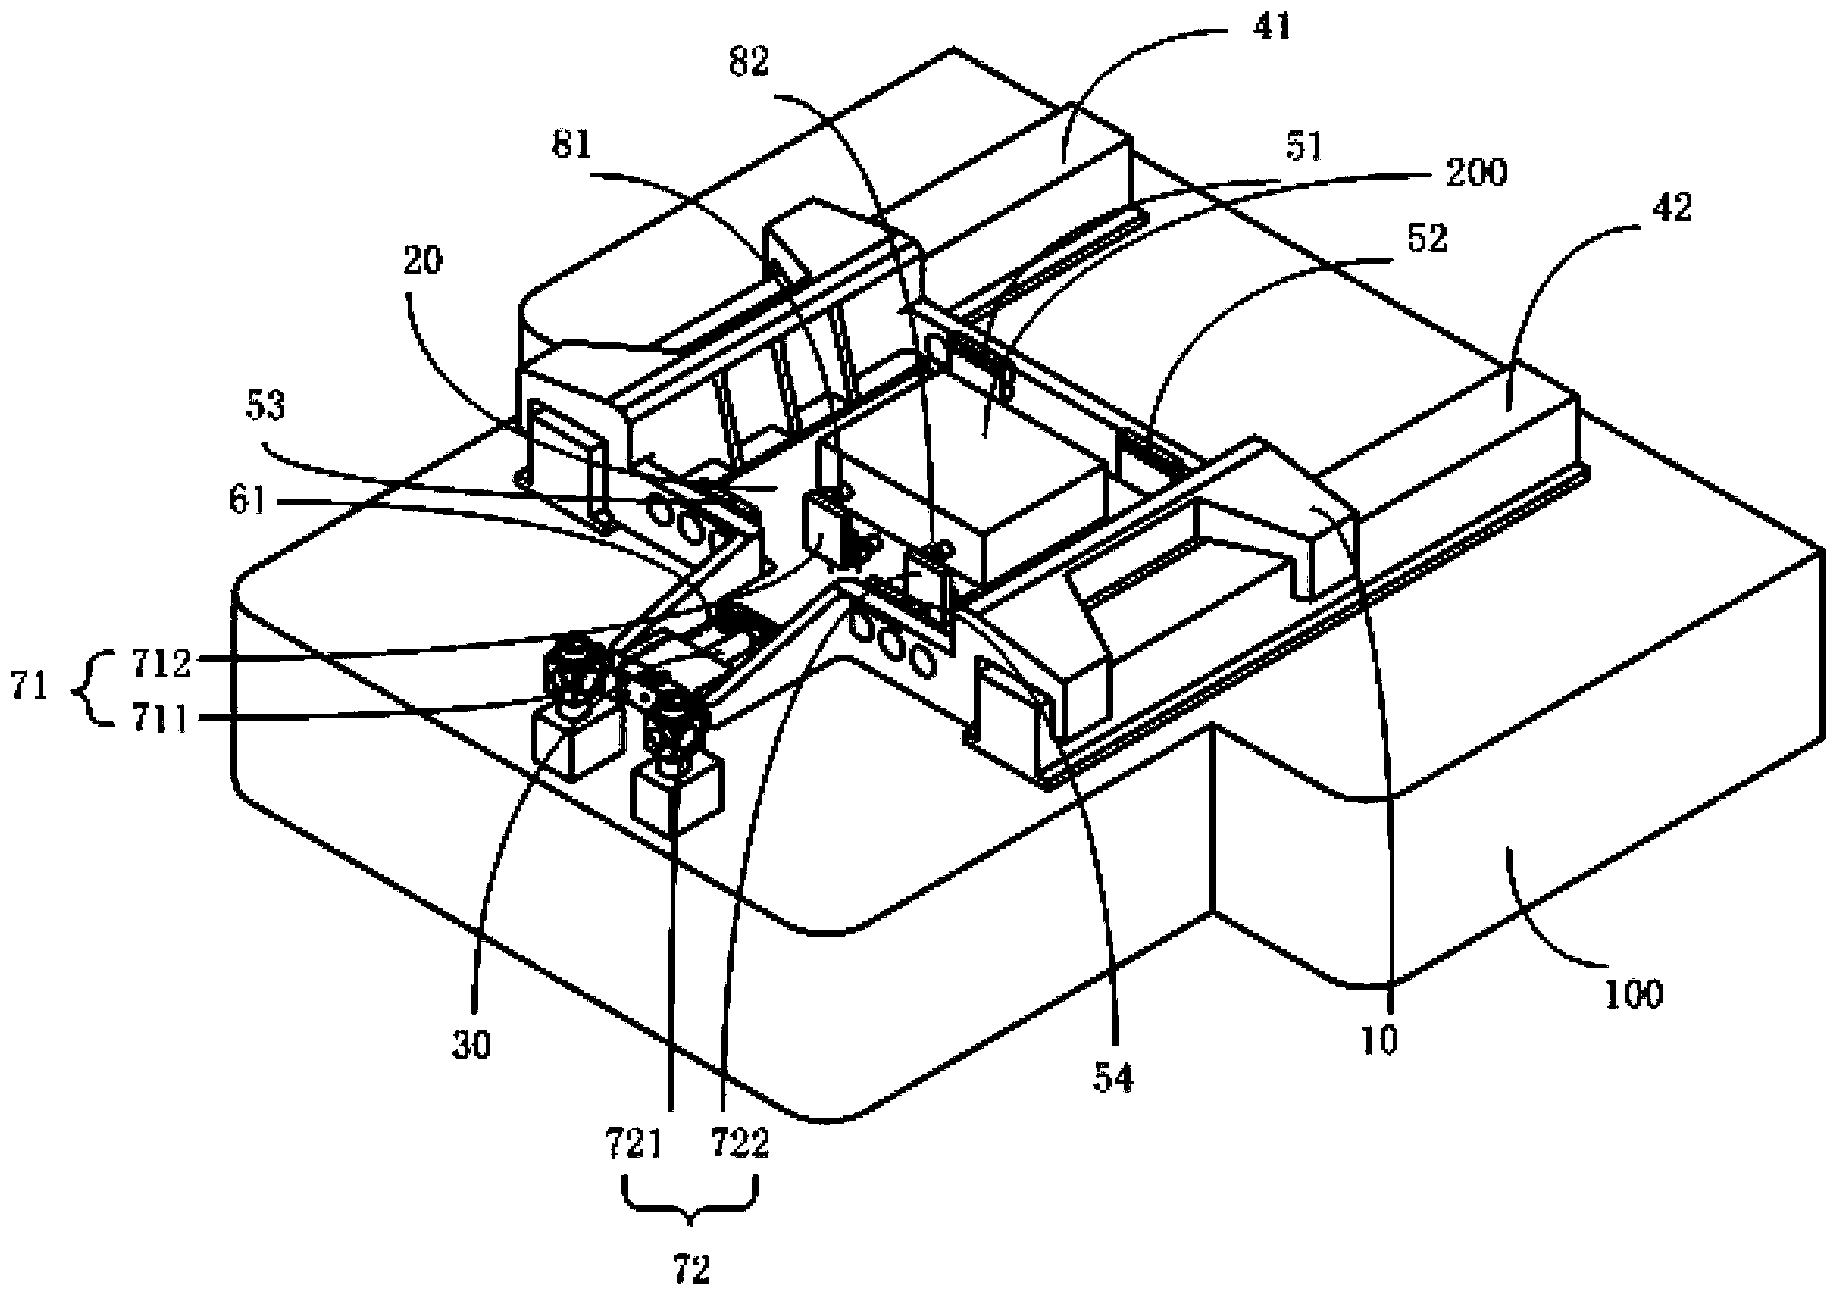 Nanometer positioning device and system